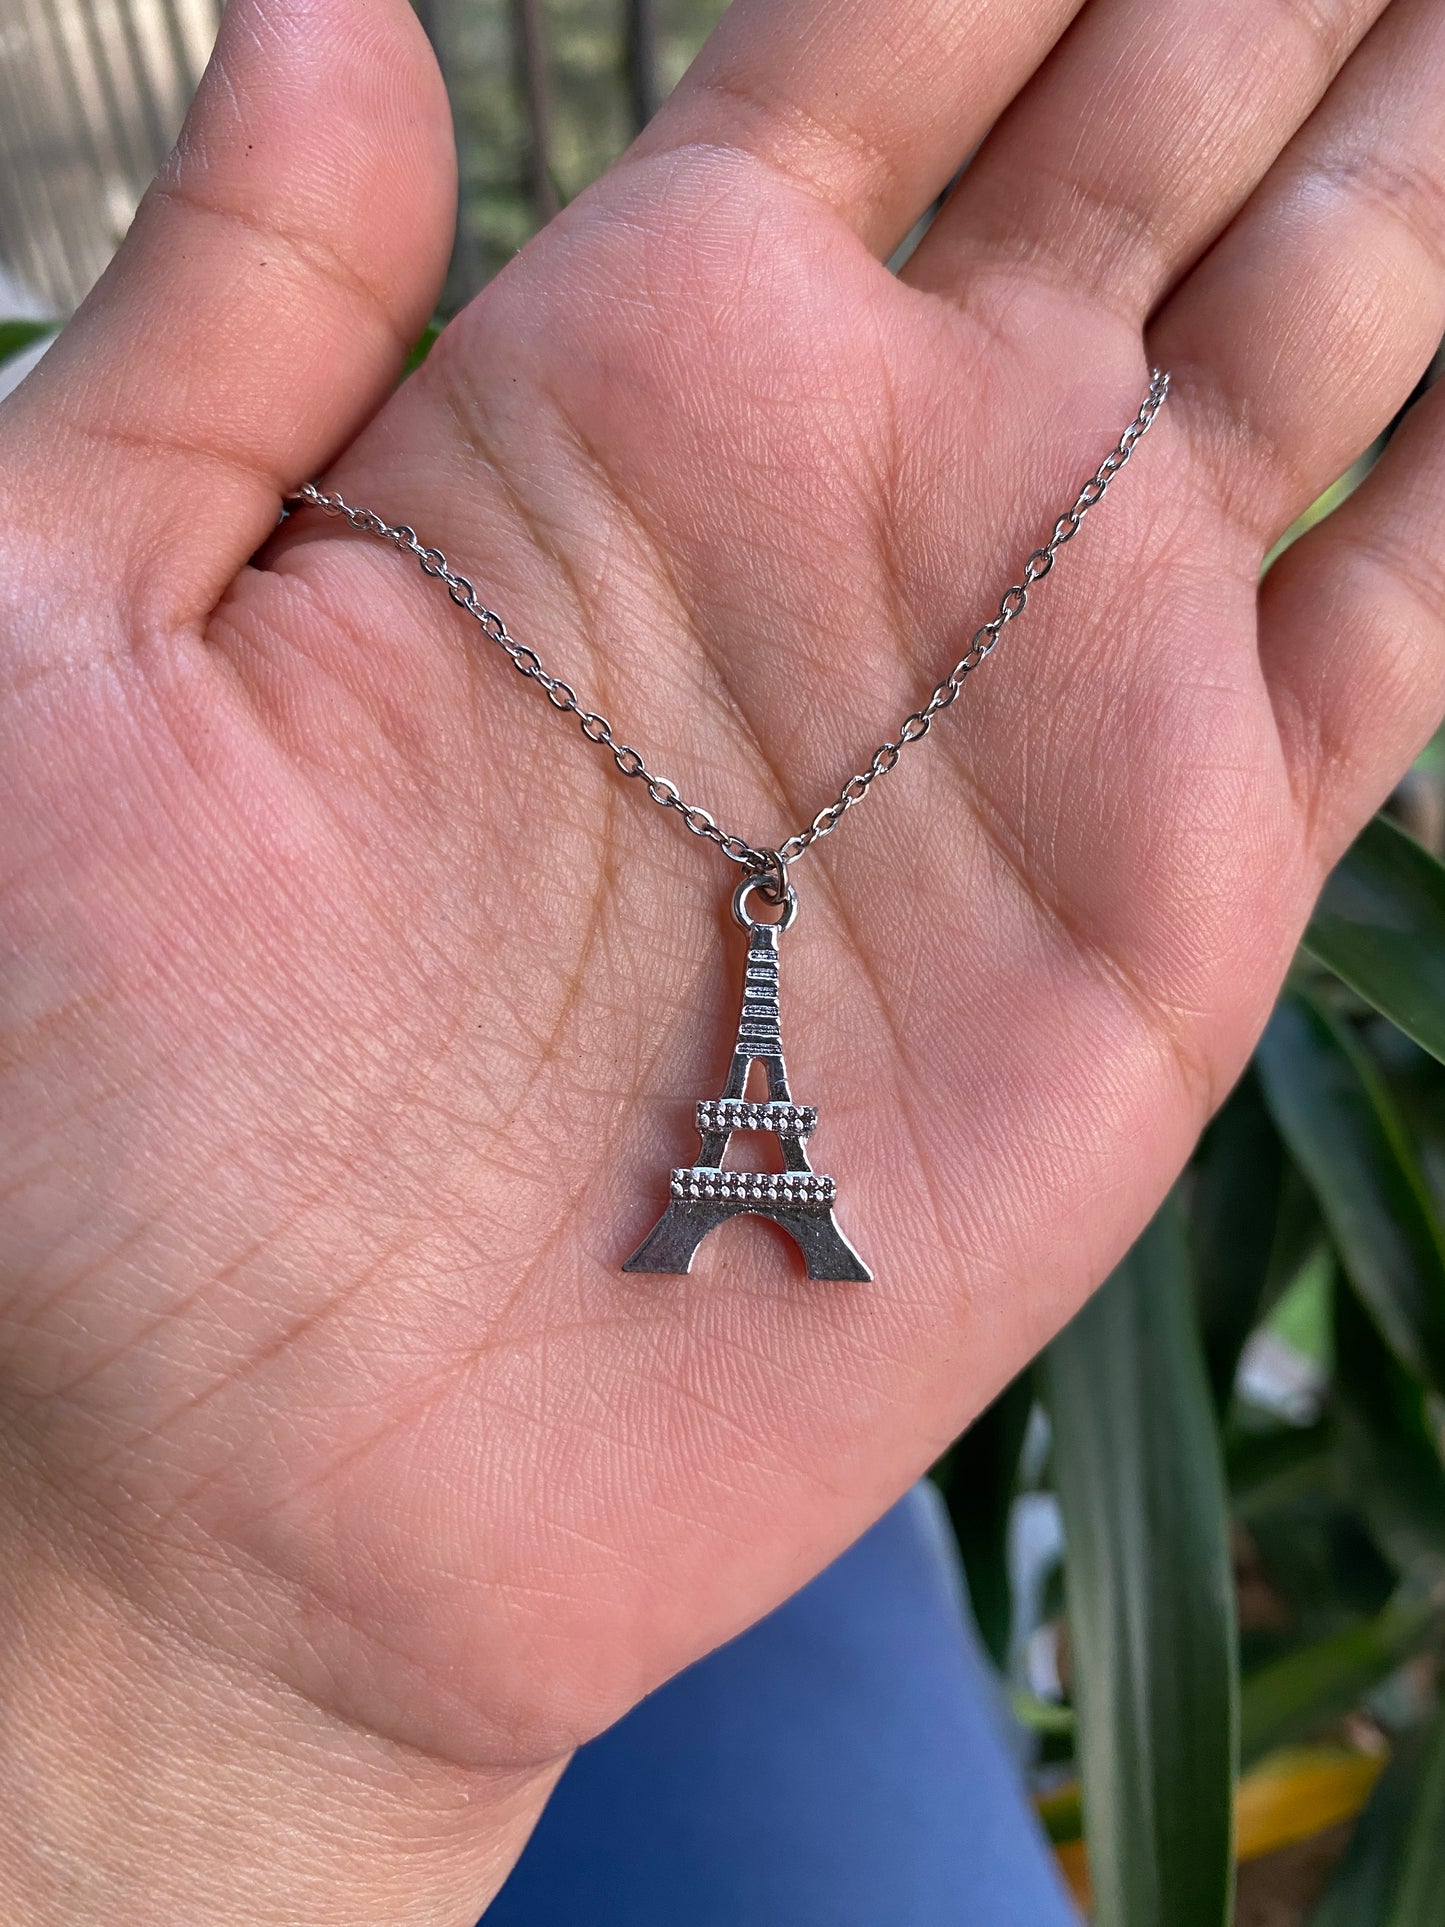 EIFFEL TOWER NECKLACE